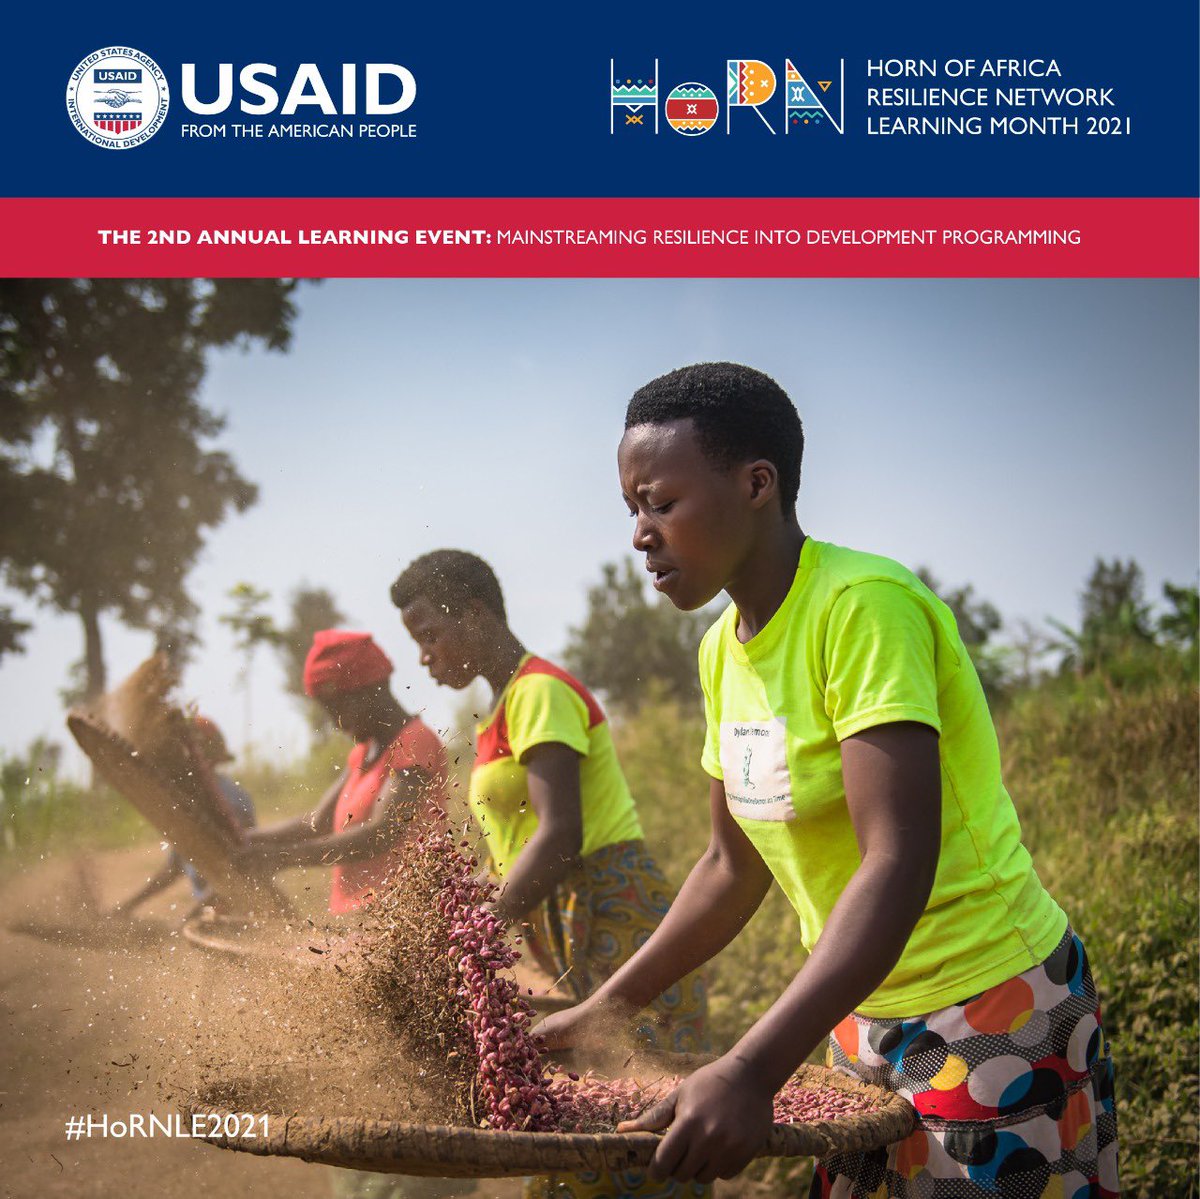 Today you will Learn how #USAIDTransforms two communities from Kenya and Uganda.

They have overcome the cycle of violence brought on by recurring droughts in the region. #HoRNLE2021